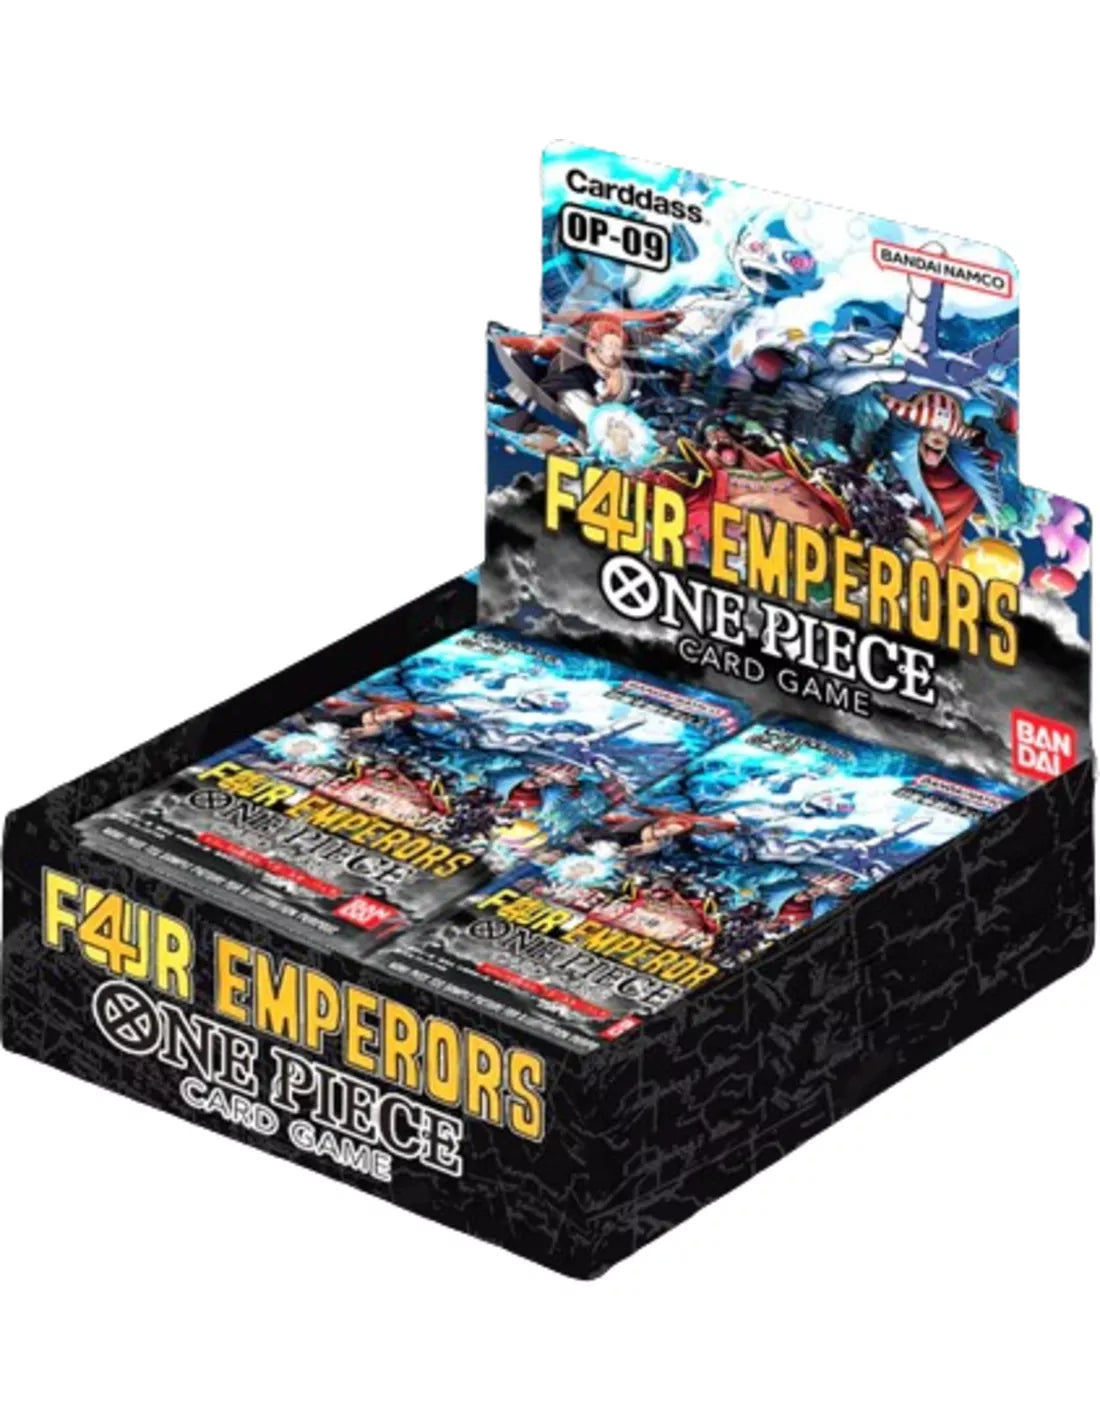 One Piece OP-09 – The Four Emperors Booster Box